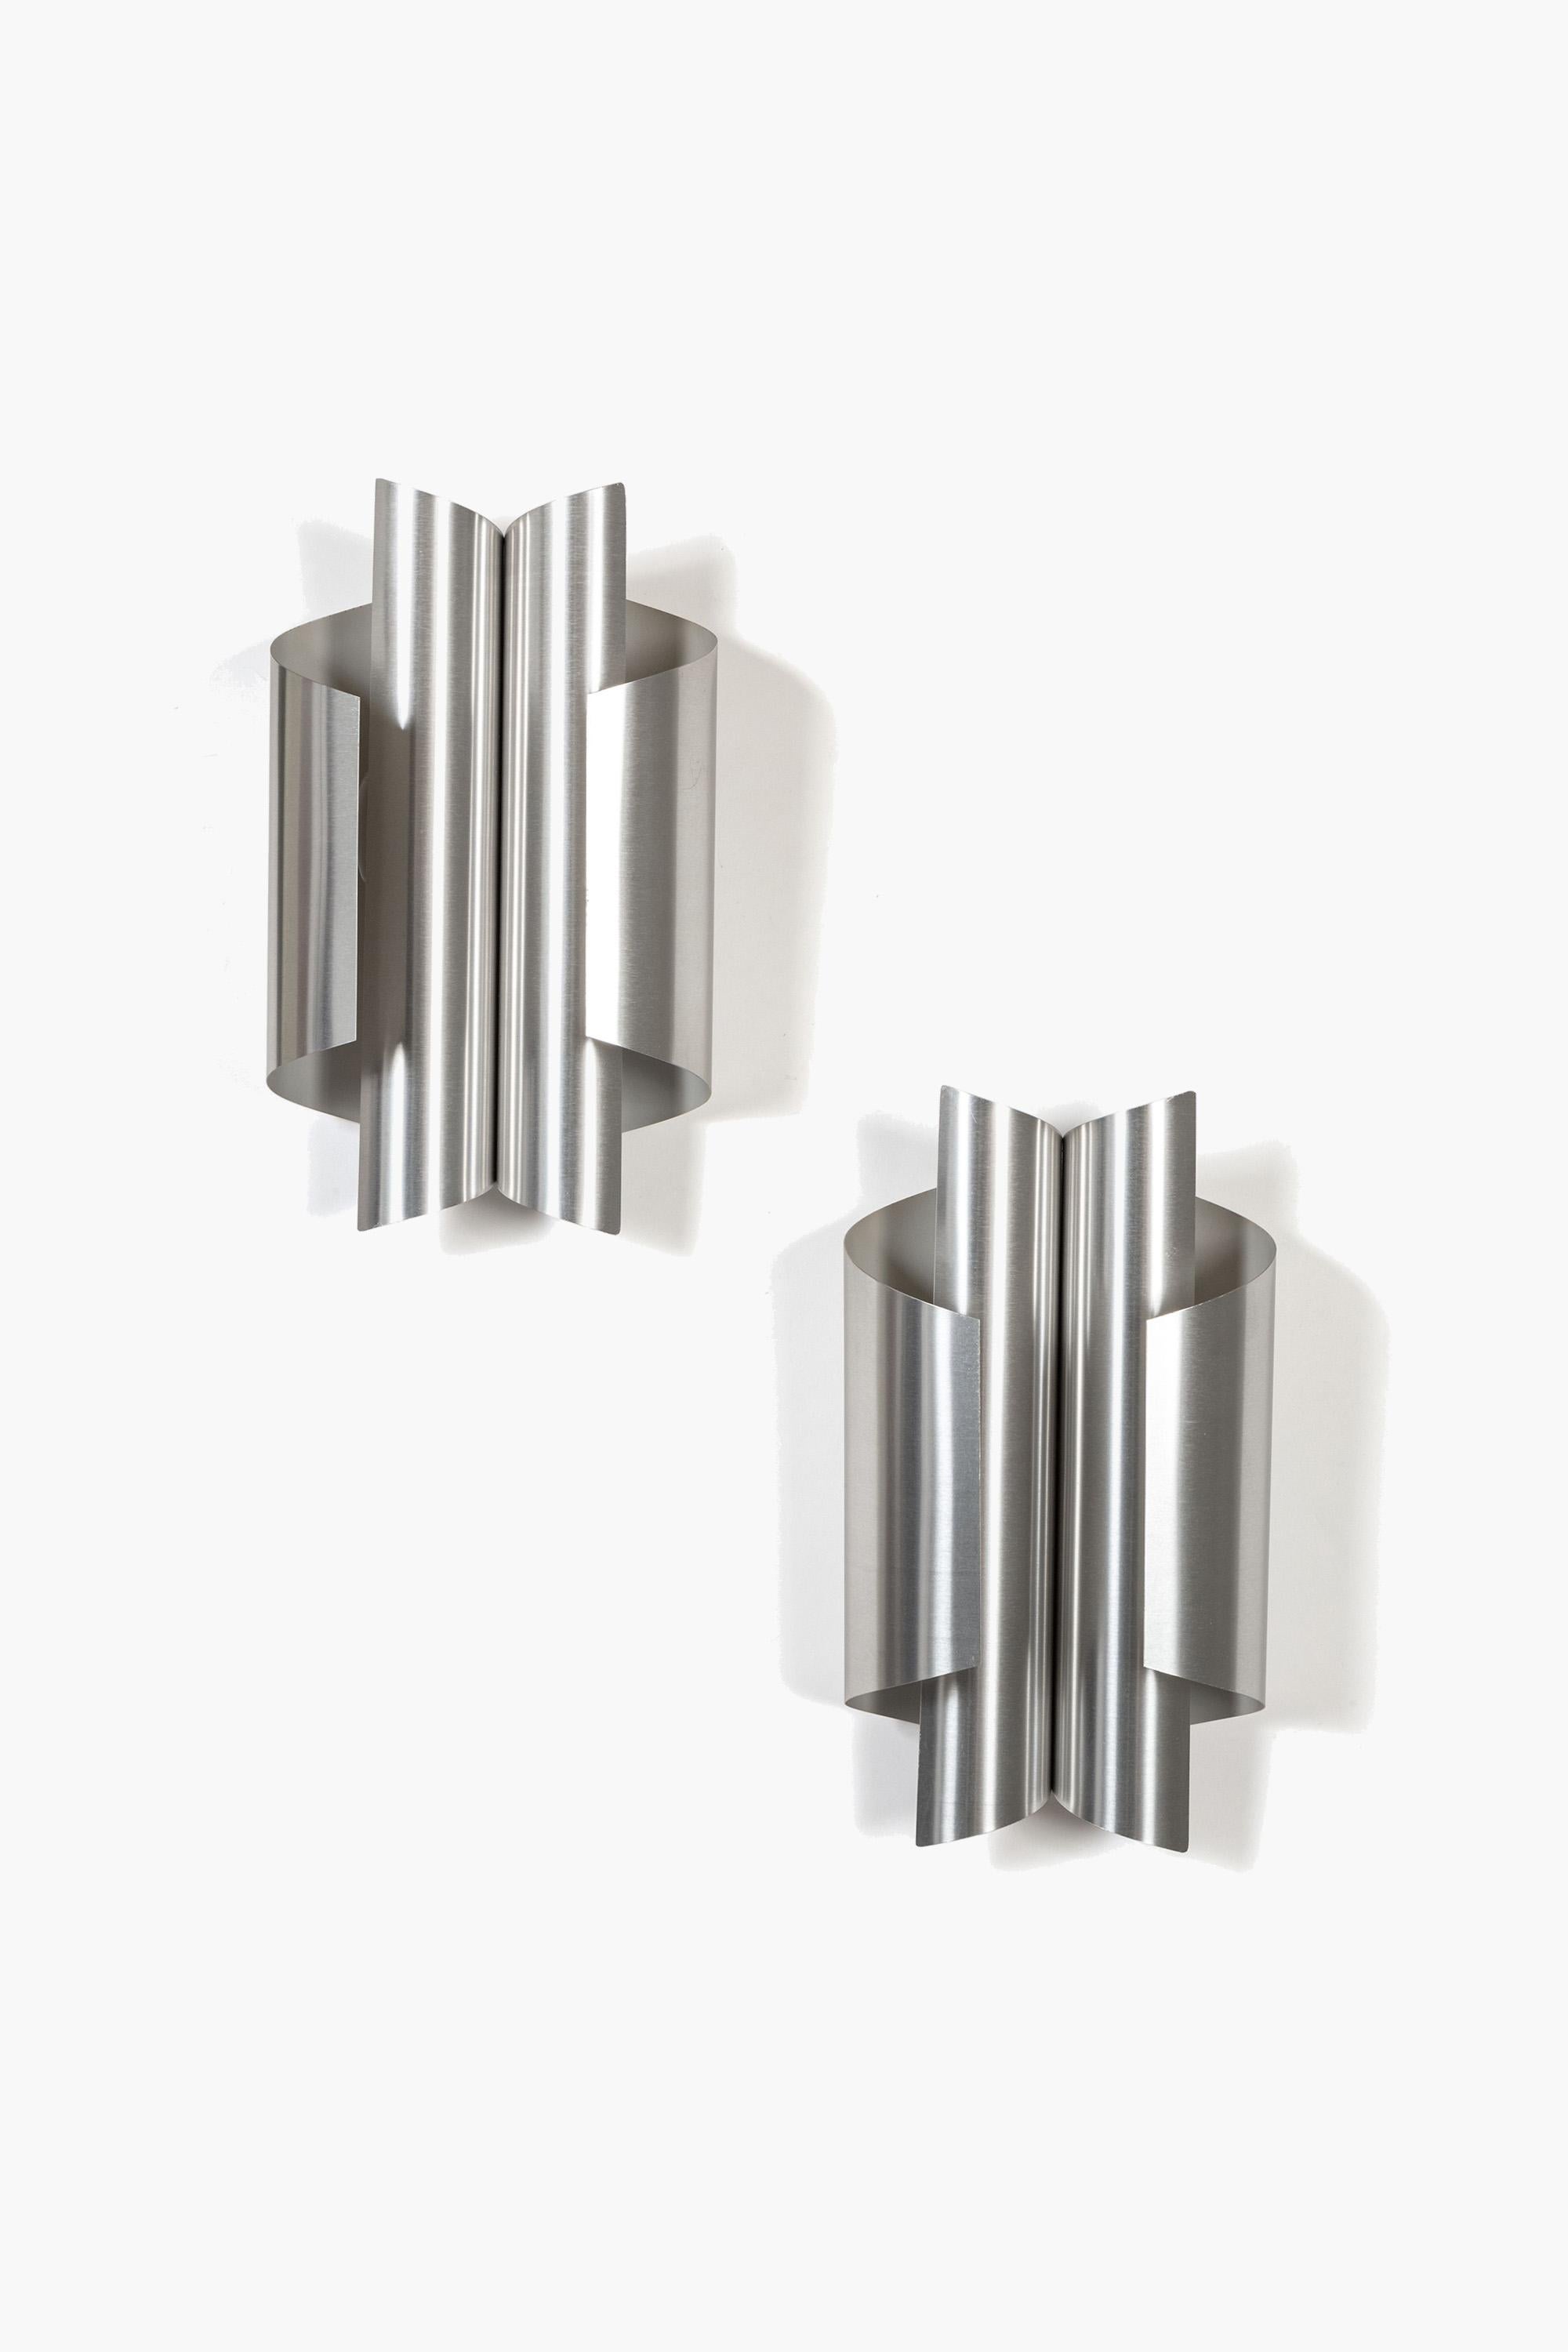 Pair of Sculptural Brushed Aluminium Wall Lights, Italian, 1970s In Good Condition For Sale In London, GB